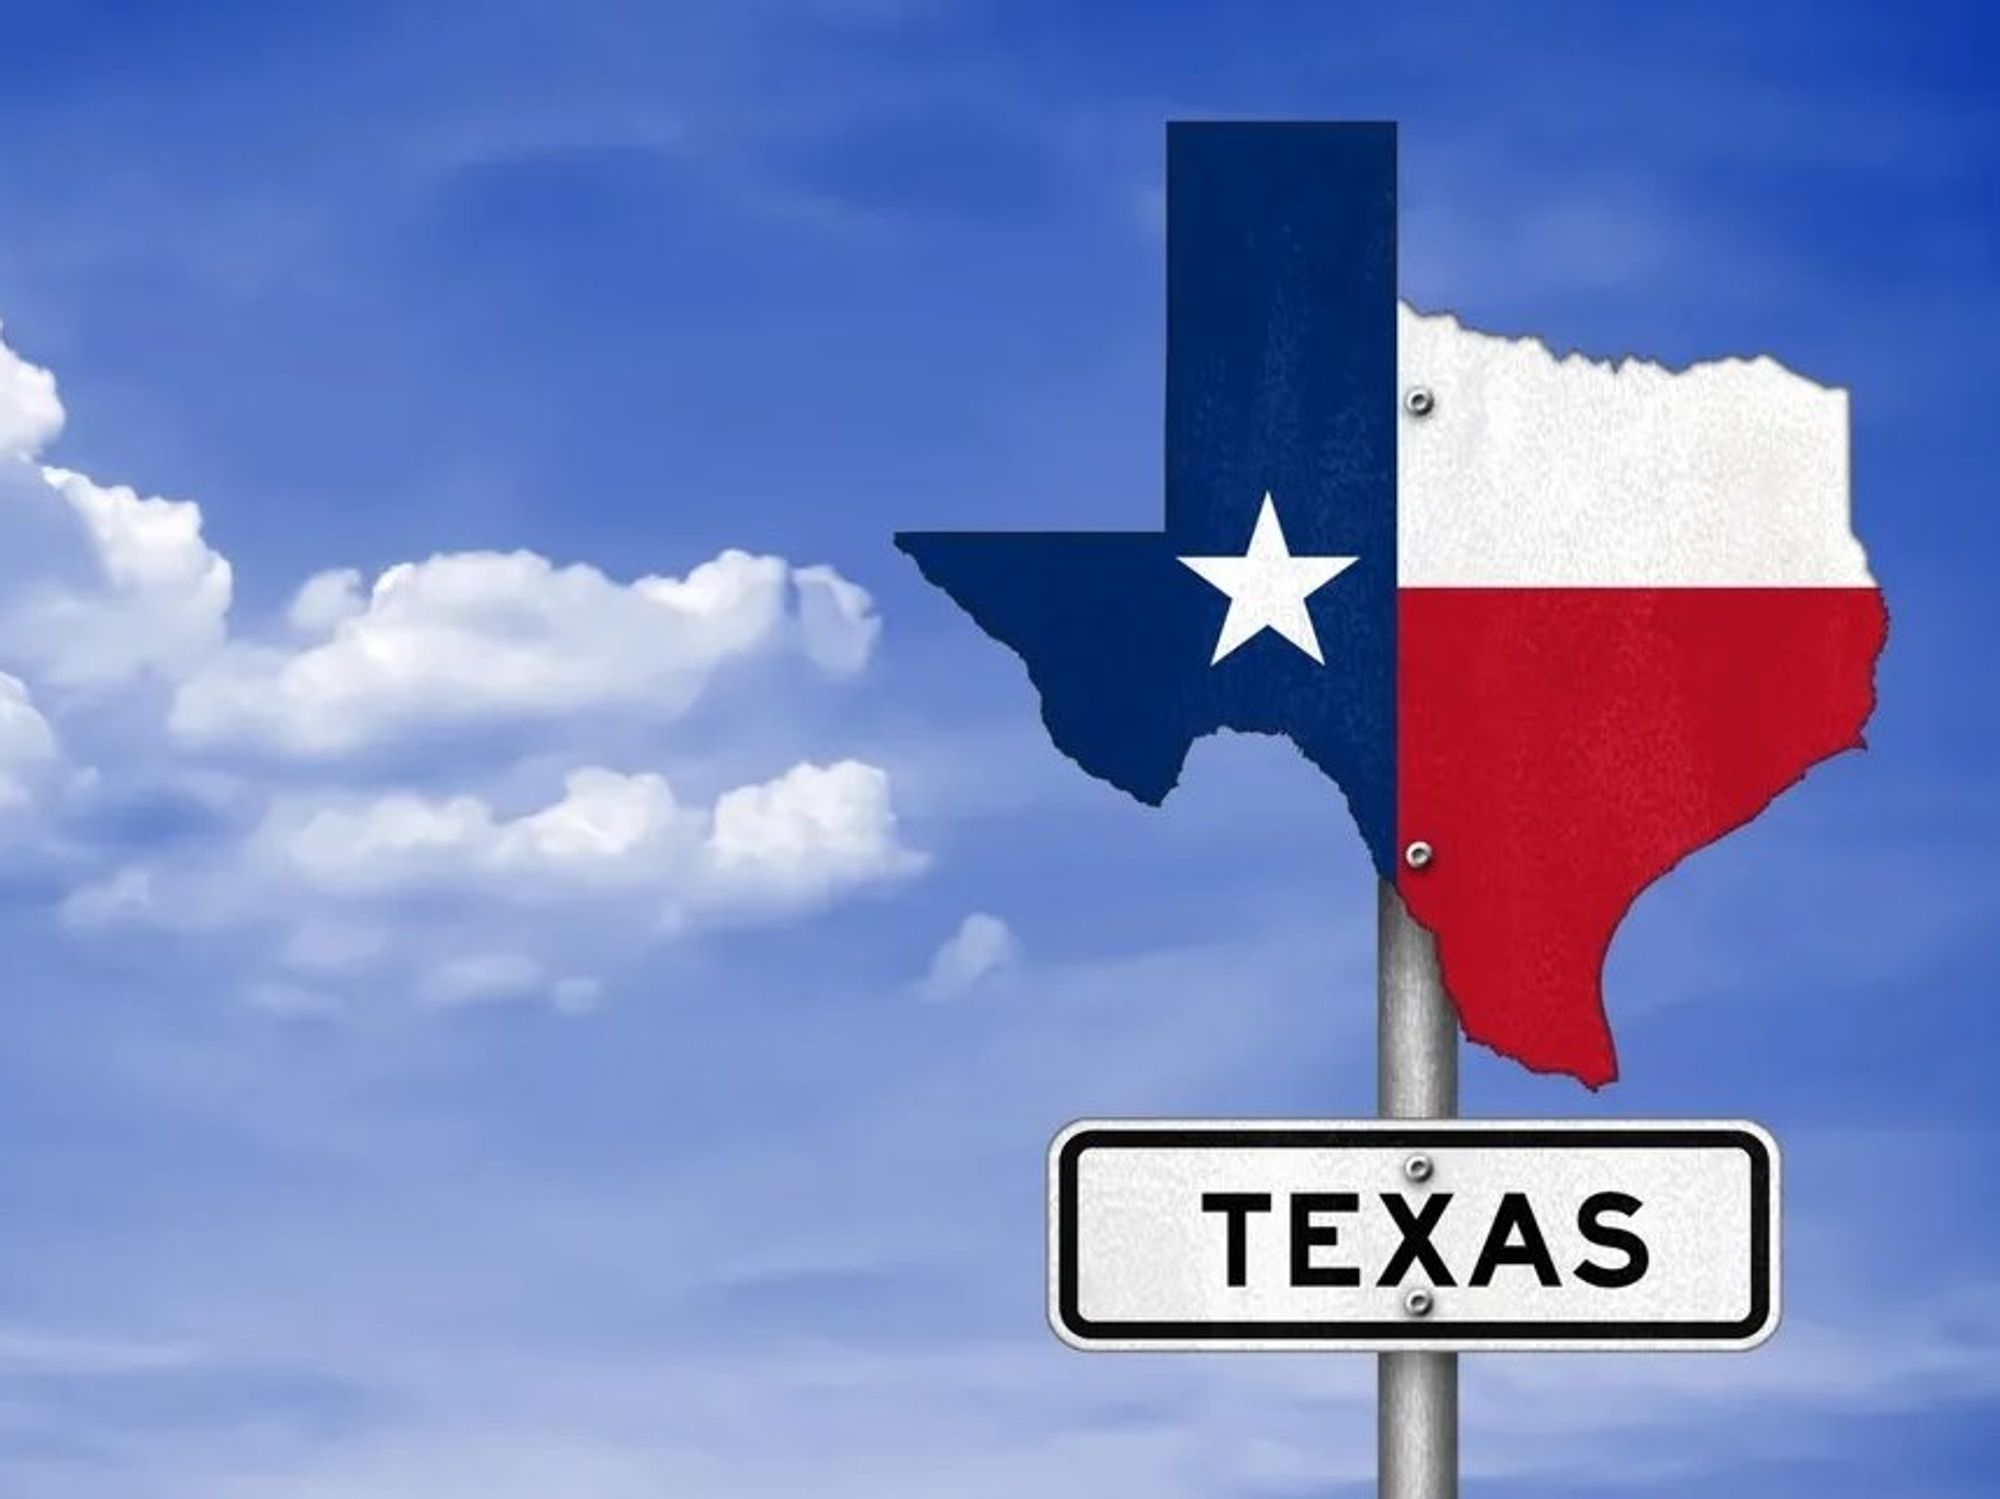 Texas is chugging along as an innovative state.